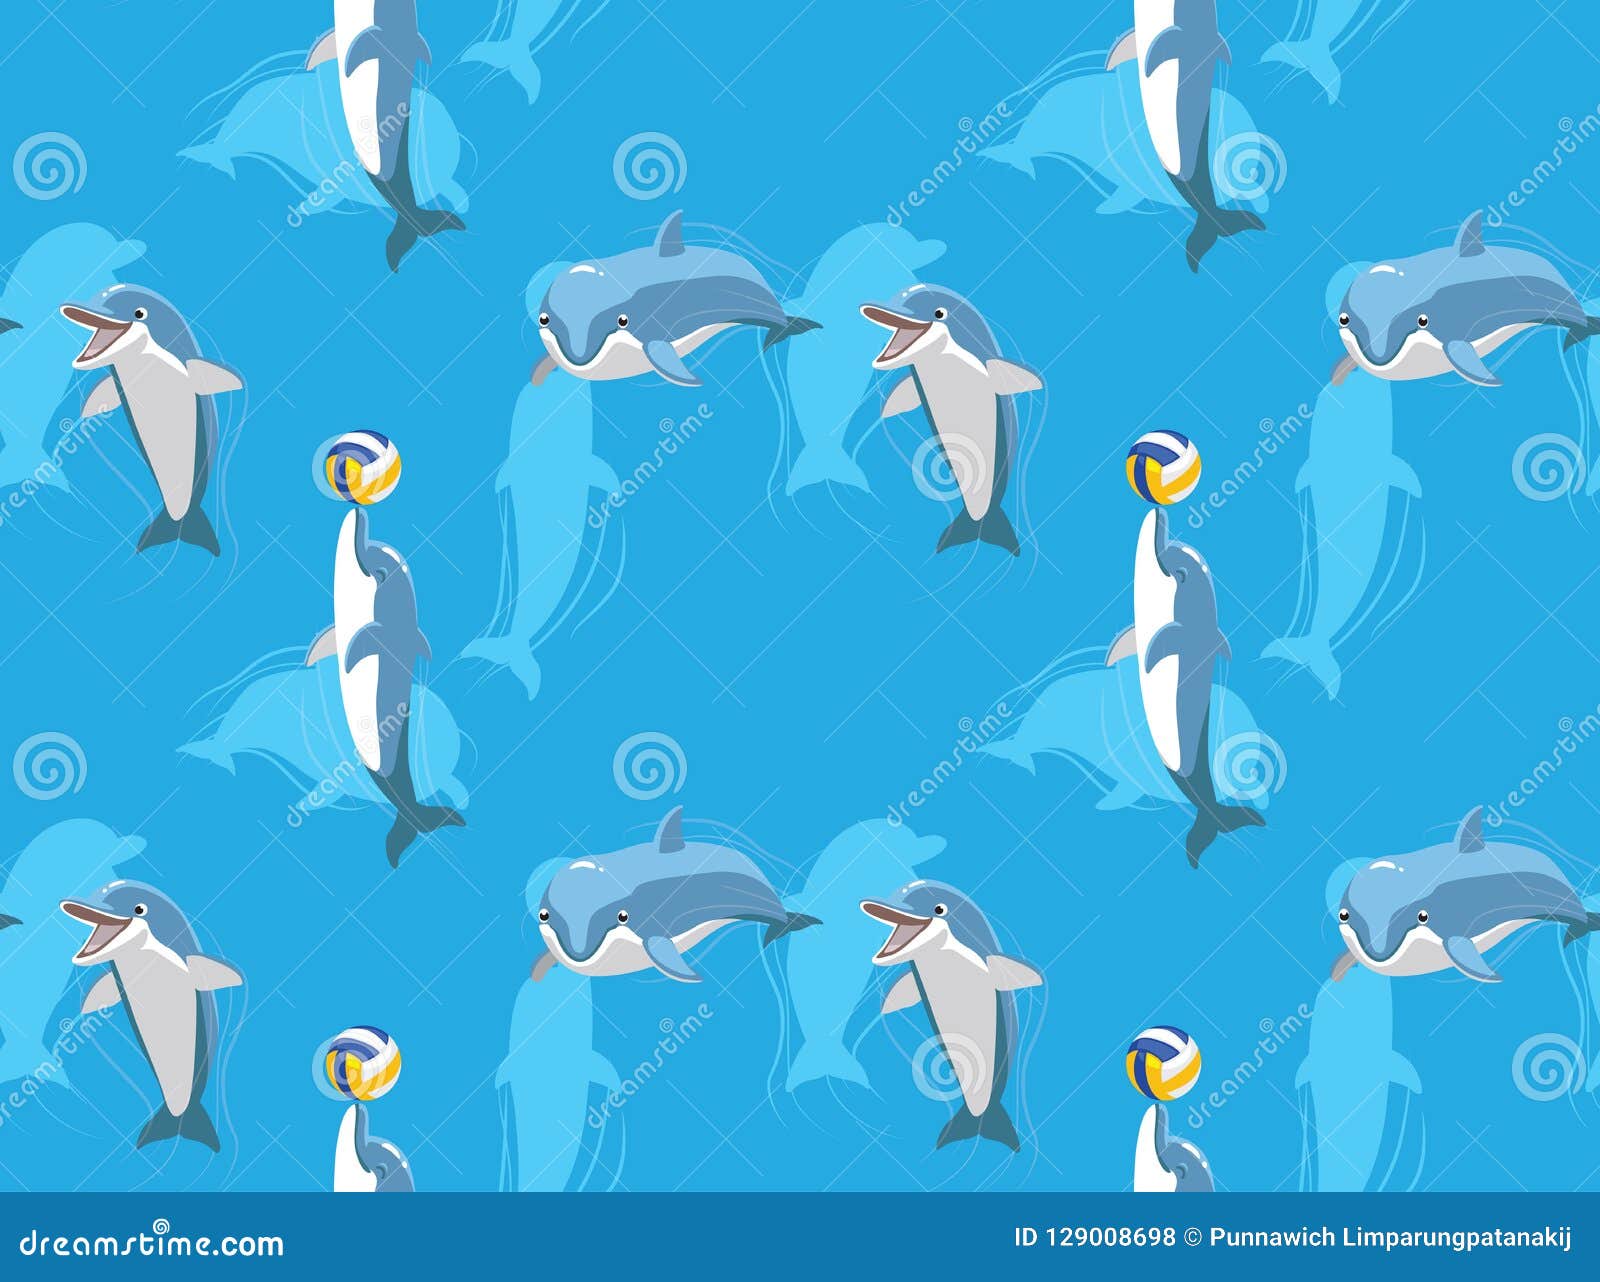 Cute Dolphin Playing Ball Cartoon Background Seamless Wallpaper Stock  Vector - Illustration of smile, mammal: 129008698